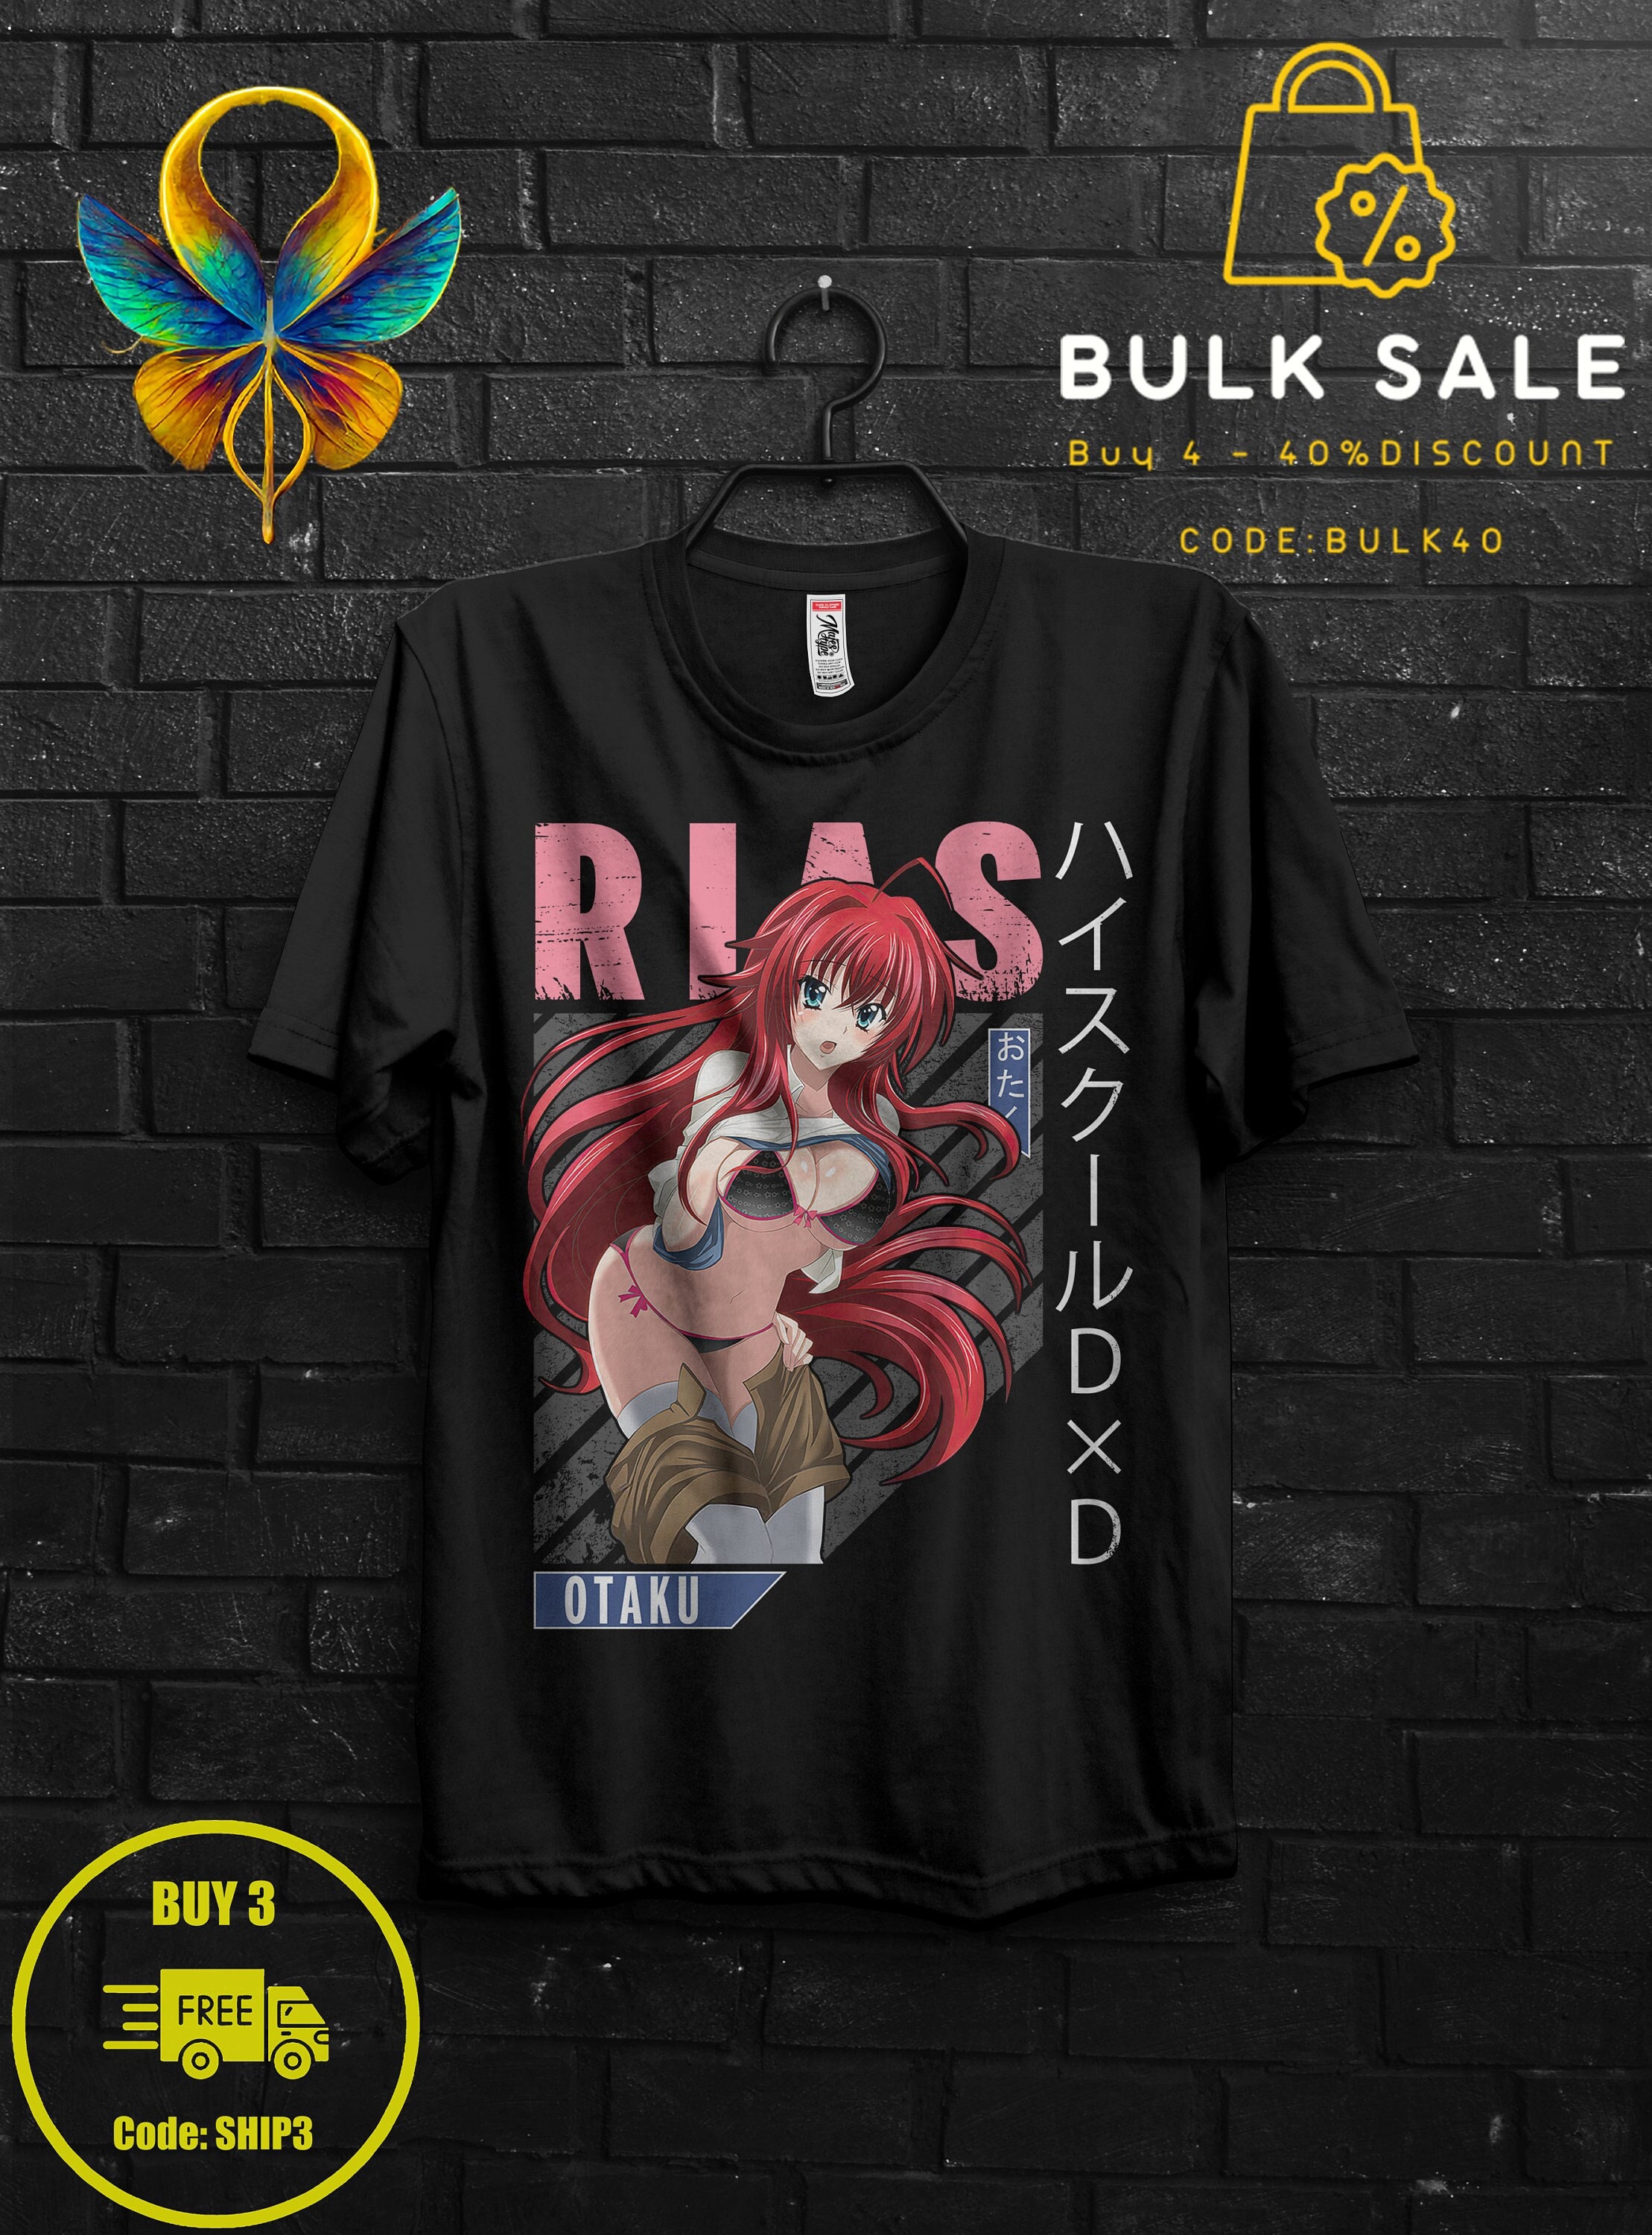 Rias Gremory Shirt Anime Gift Cosplay For Girl,Xenovia Appareal For Her,High School DxD Tee,Rossweisse Tshirt For Sitri,Issei Hyoudou Sweat 1600239269